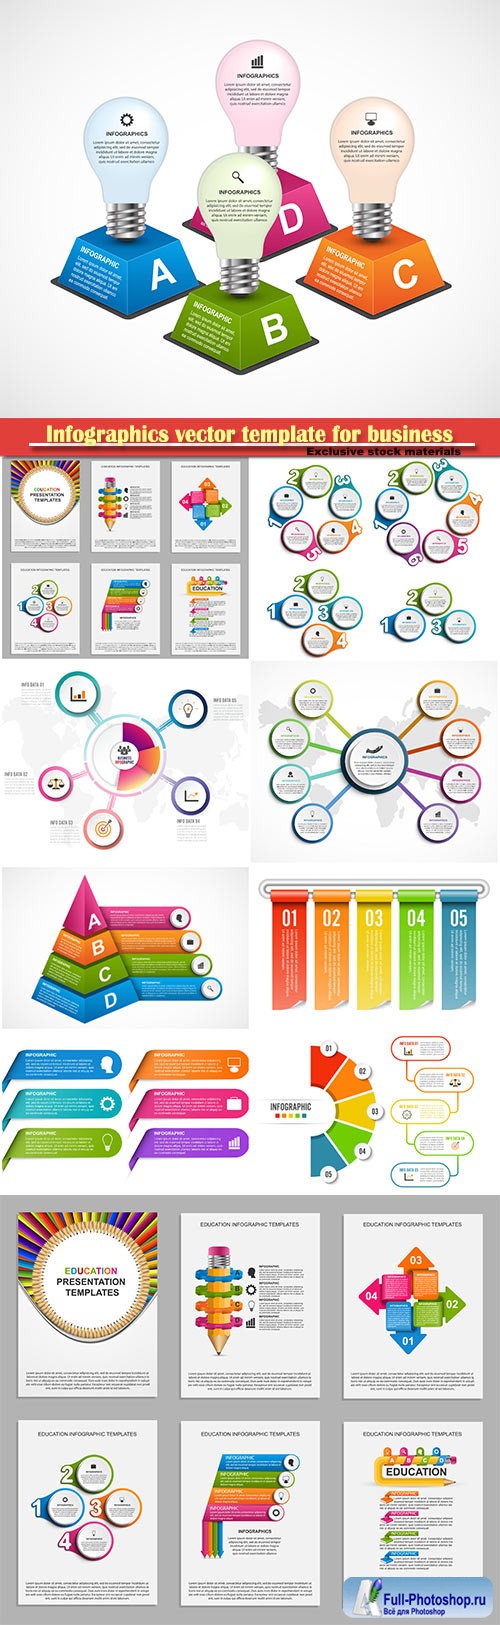 Infographics vector template for business presentations or information banner # 97